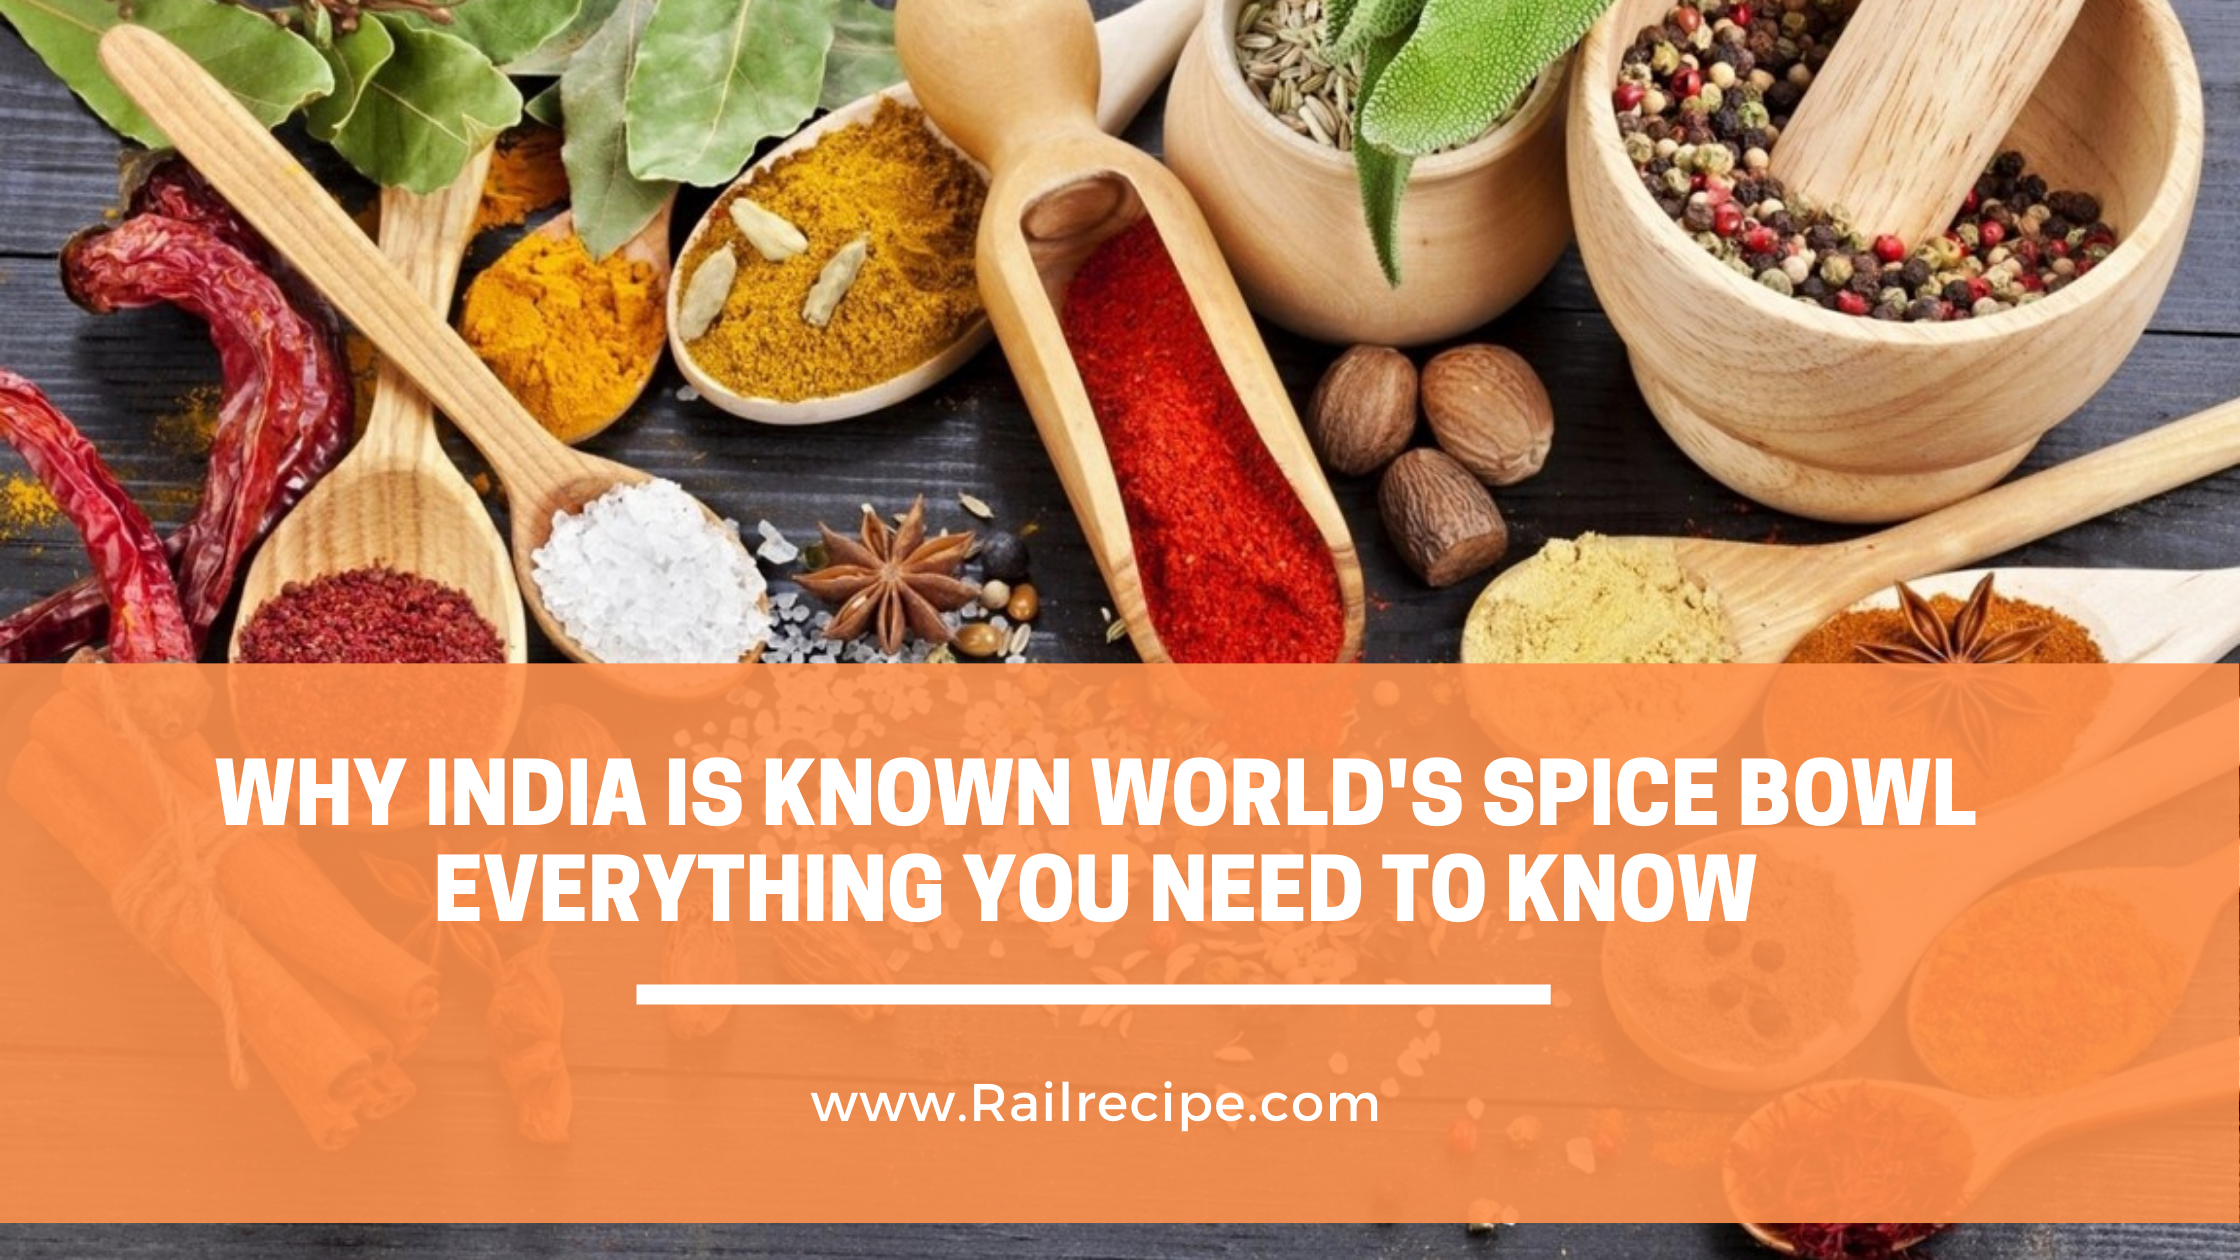 Why India Is Known World's Spice Bowl- Everything You Need to Know